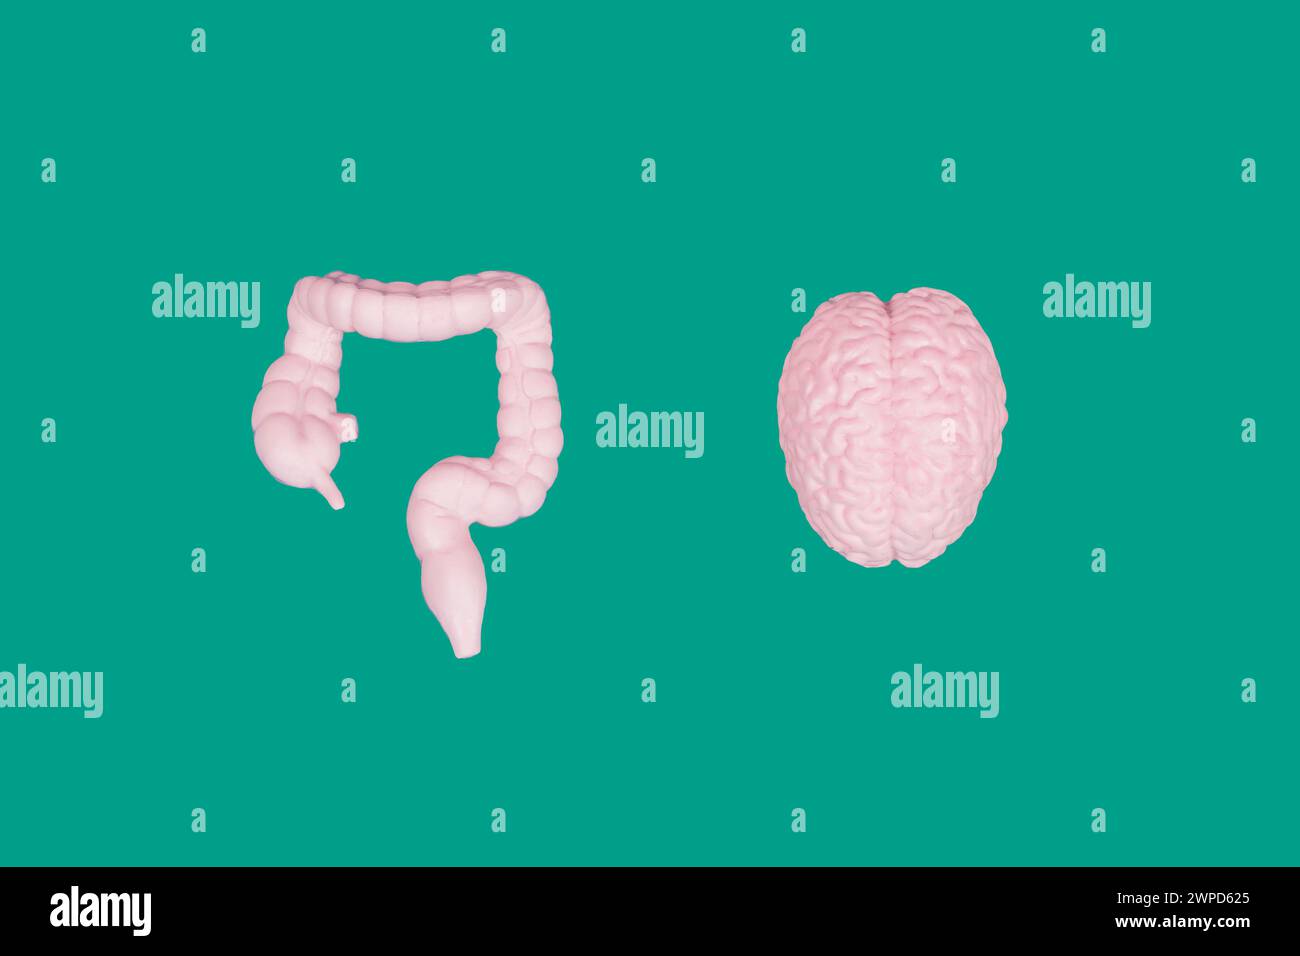 Top view of a human brain and intestine figurines arranged on a green background. Health related concept. Stock Photo